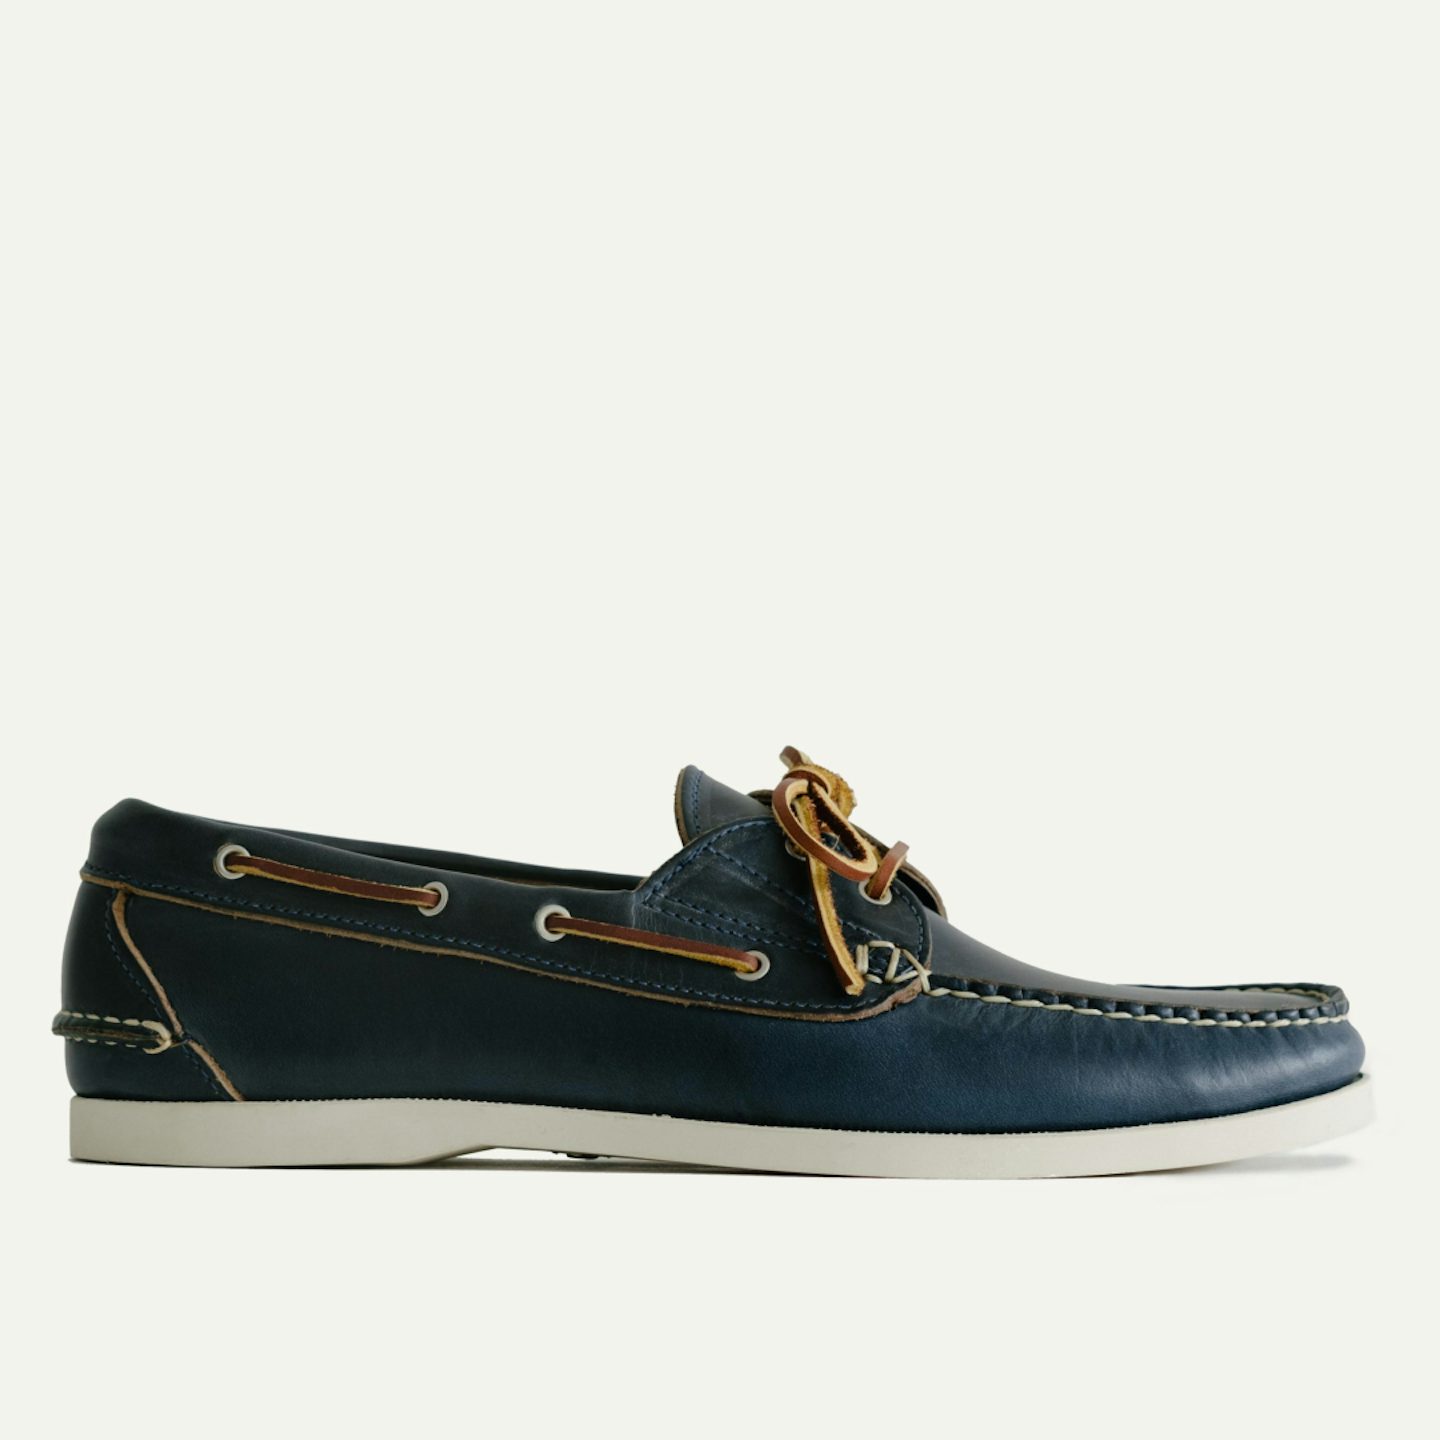 Boat Shoe - Navy Chromexcel, Deck Sole - Made in USA